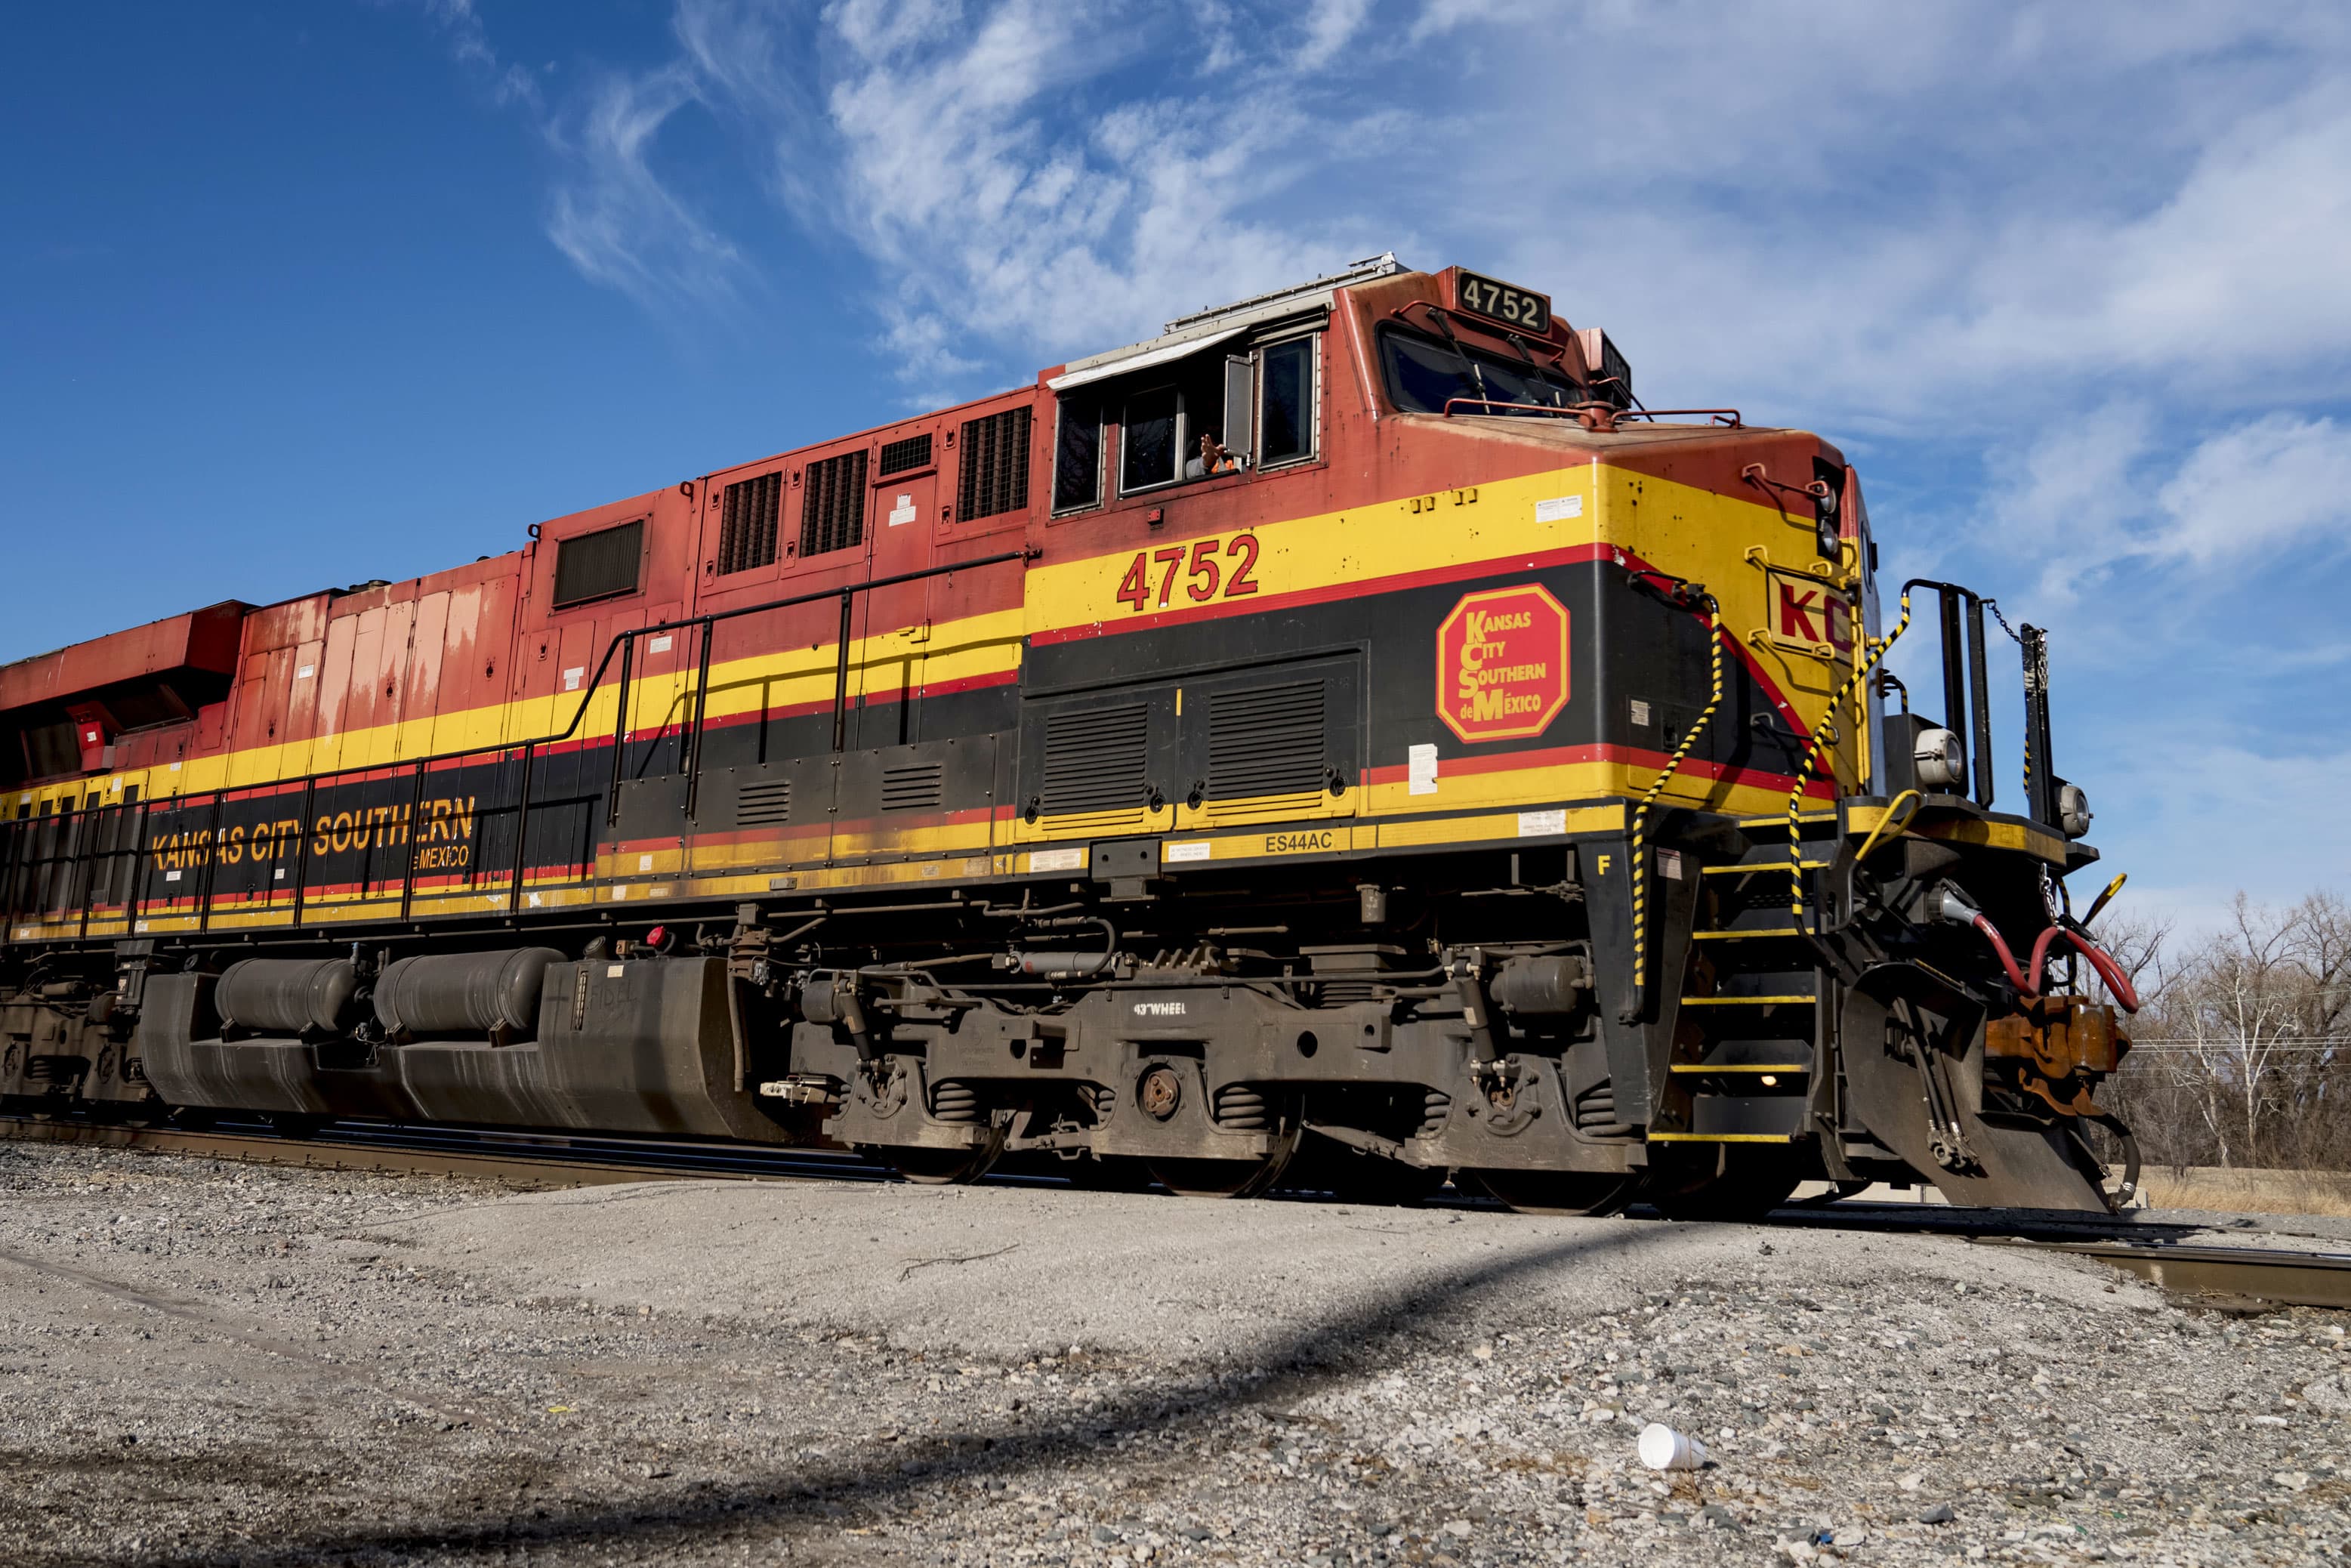 Canadian Pacific Railway to buy Kansas City Southern for $ 25 billion